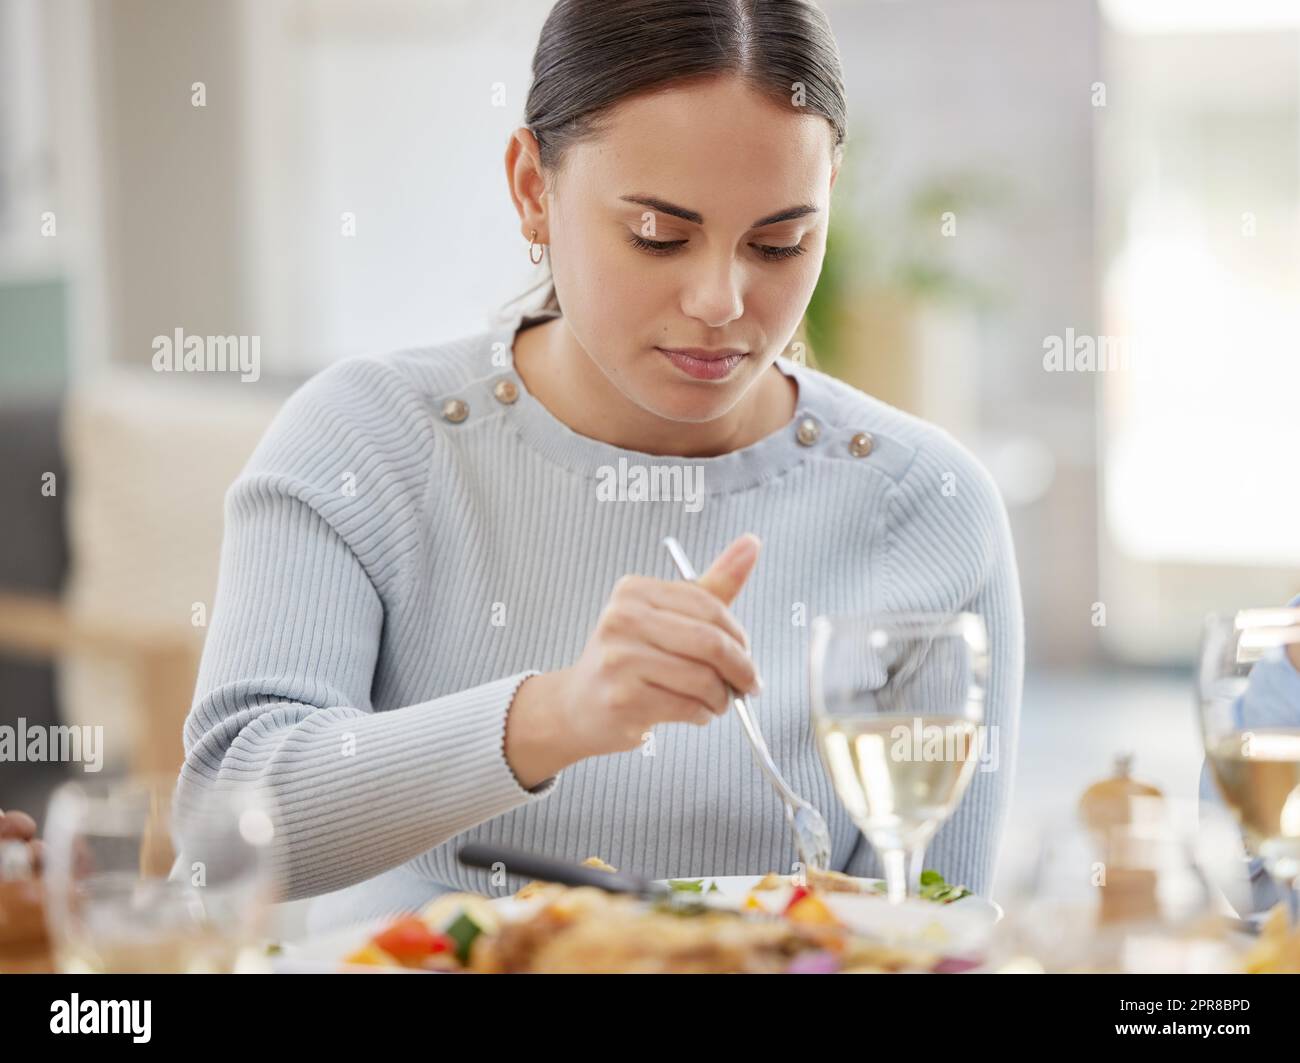 No-one cooks like mom. a young woman enjoying her meal with her family at home. Stock Photo